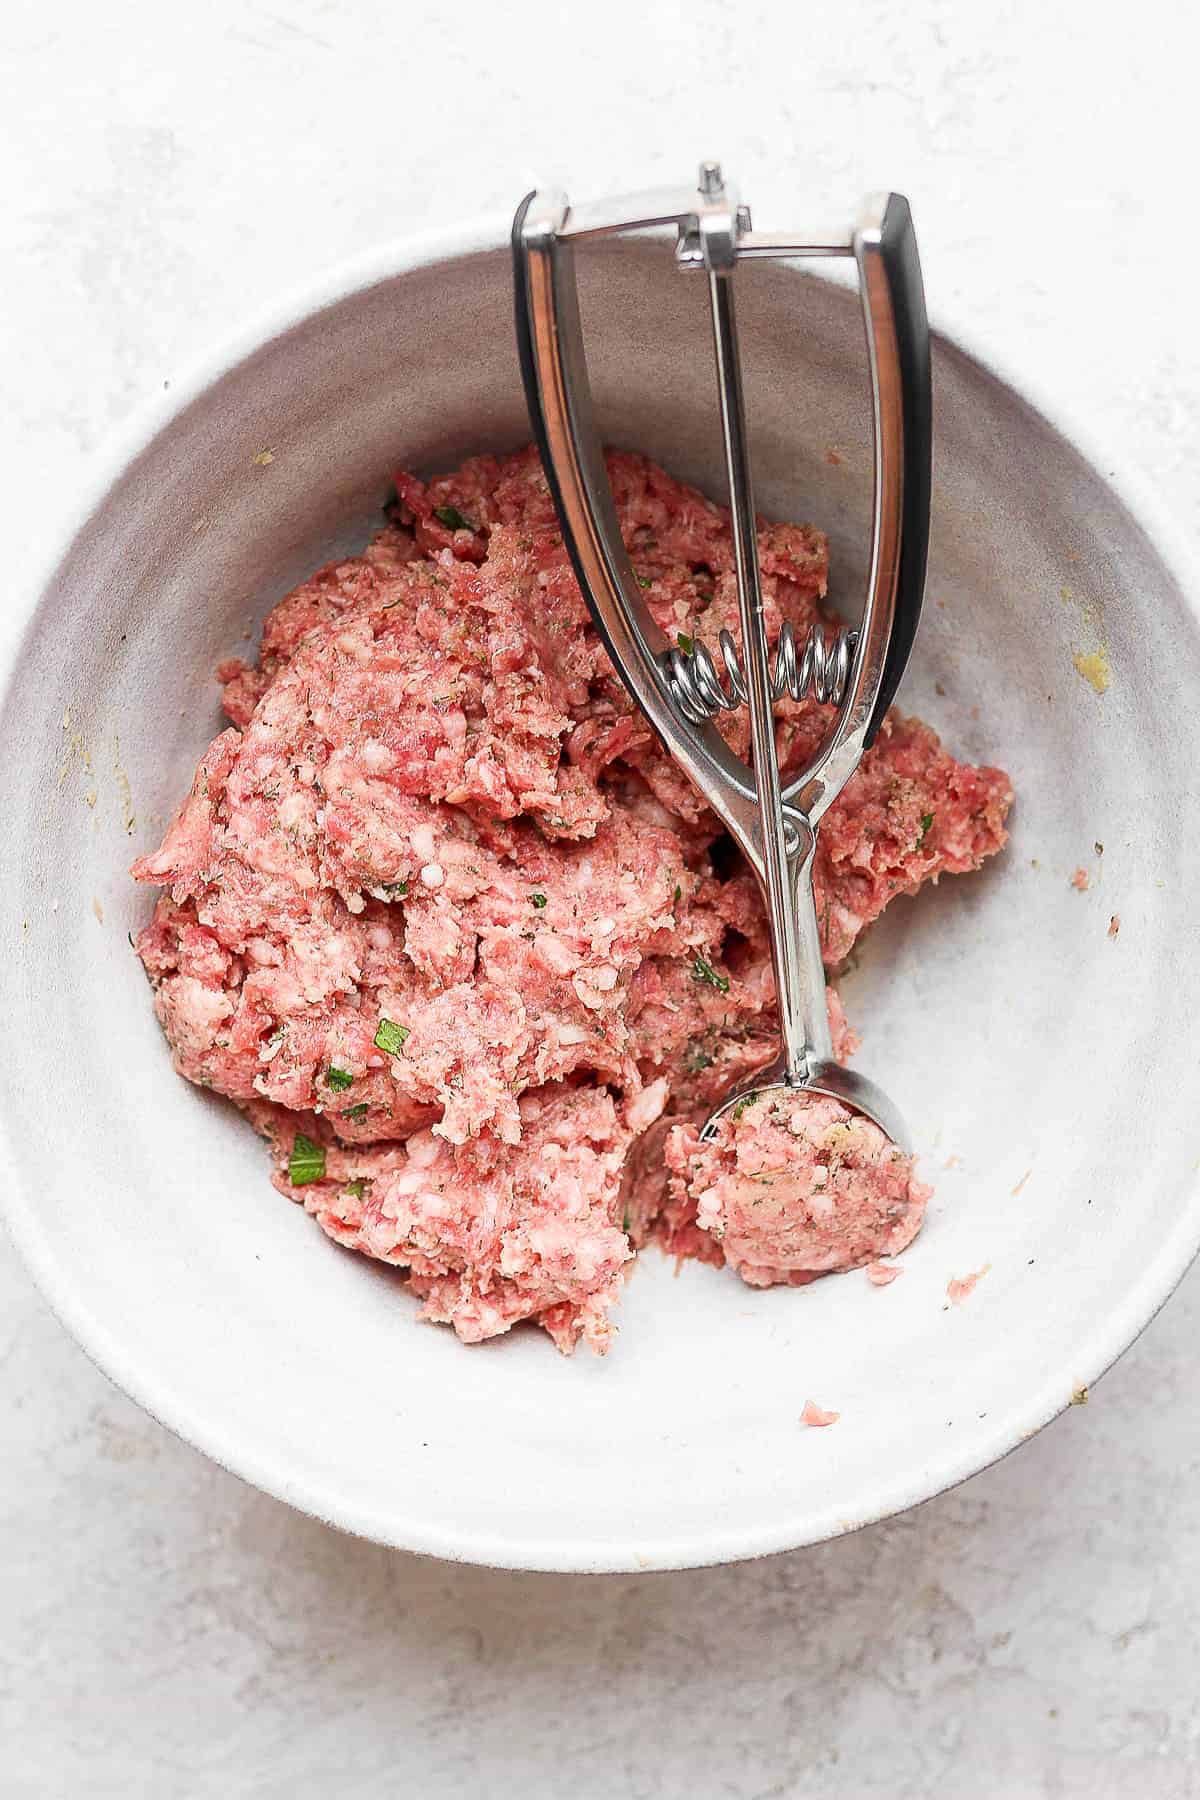 Meatball ingredients mixed together and being scooped with a cookie scoop.